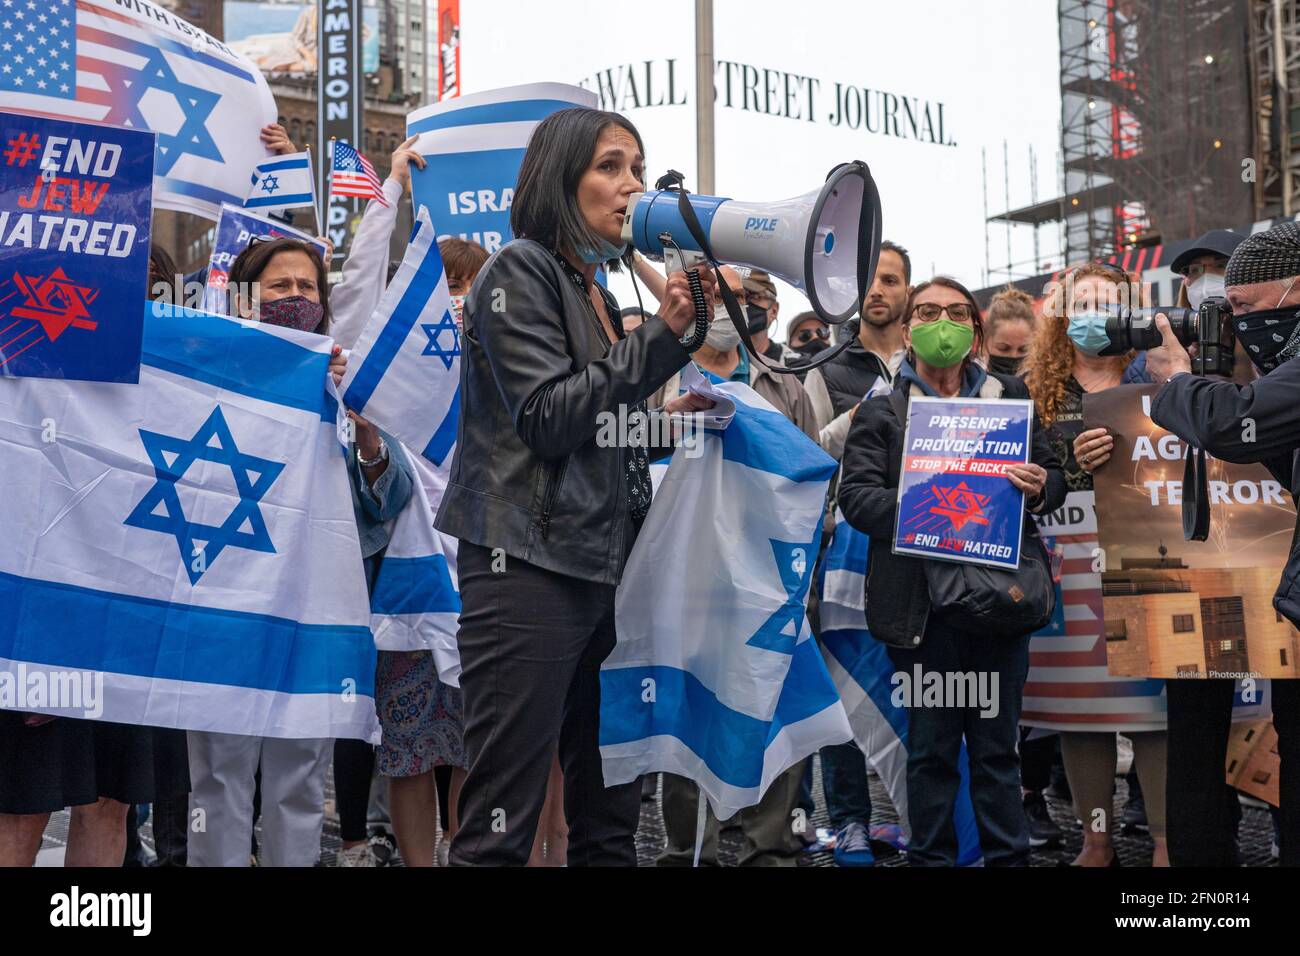 NEW YORK, NY - MAY 12: Tal Shuster speaks to the crowd as the Israeli-American Council (IAC) and other American Jewish groups gather in Times Square in solidarity with Israel on May 12, 2021 in New York City. Rallies across America show solidarity with Israel and its people. U.S. President Joe Biden said today, May 12, that Israel has a right to defend itself but after speaking with Prime Minister Benjamin Netanyahu he hopes violent clashes with Palestinians will end quickly. Credit: Ron Adar/Alamy Live News Stock Photo